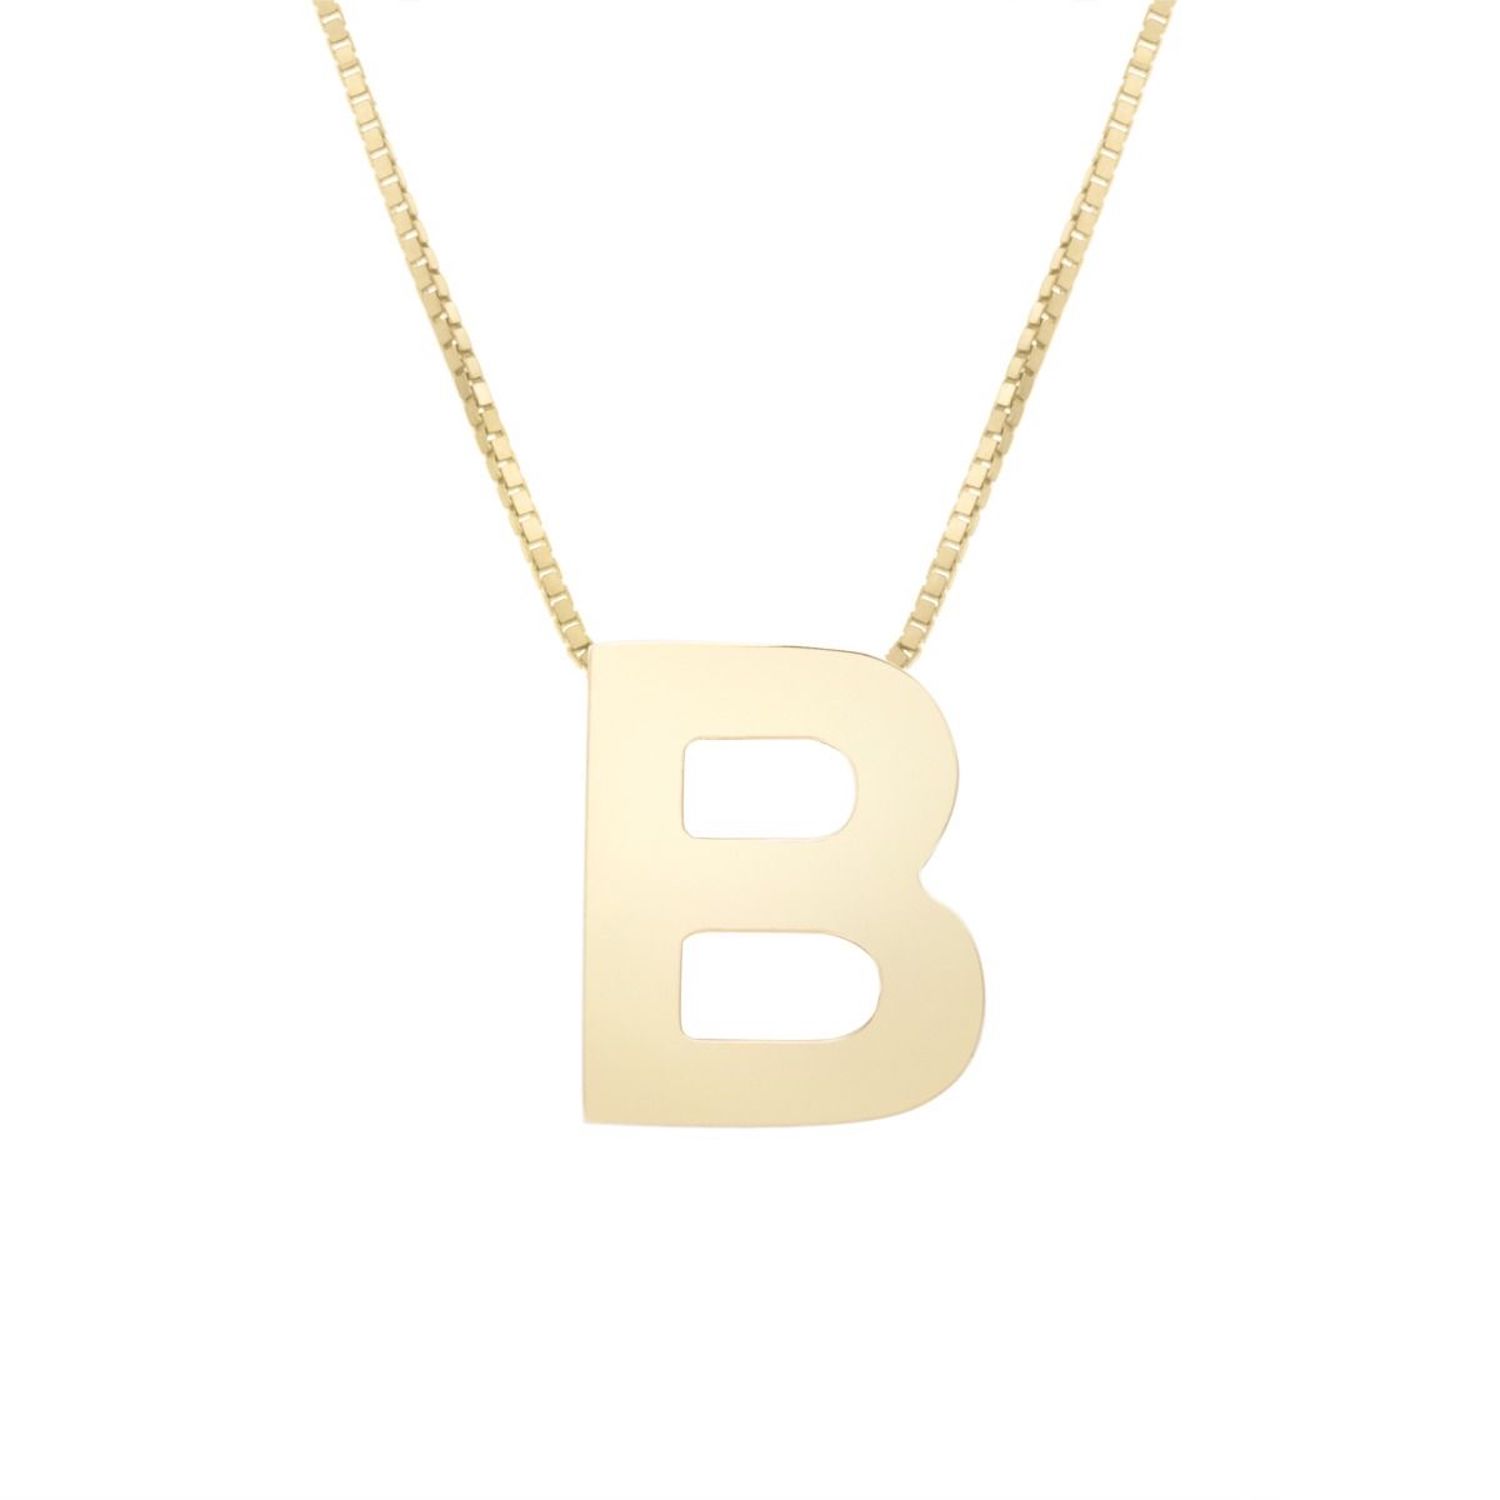 14K Yellow Gold Block Letter Initial Pendant Box Chain Necklace 16"-18" - B